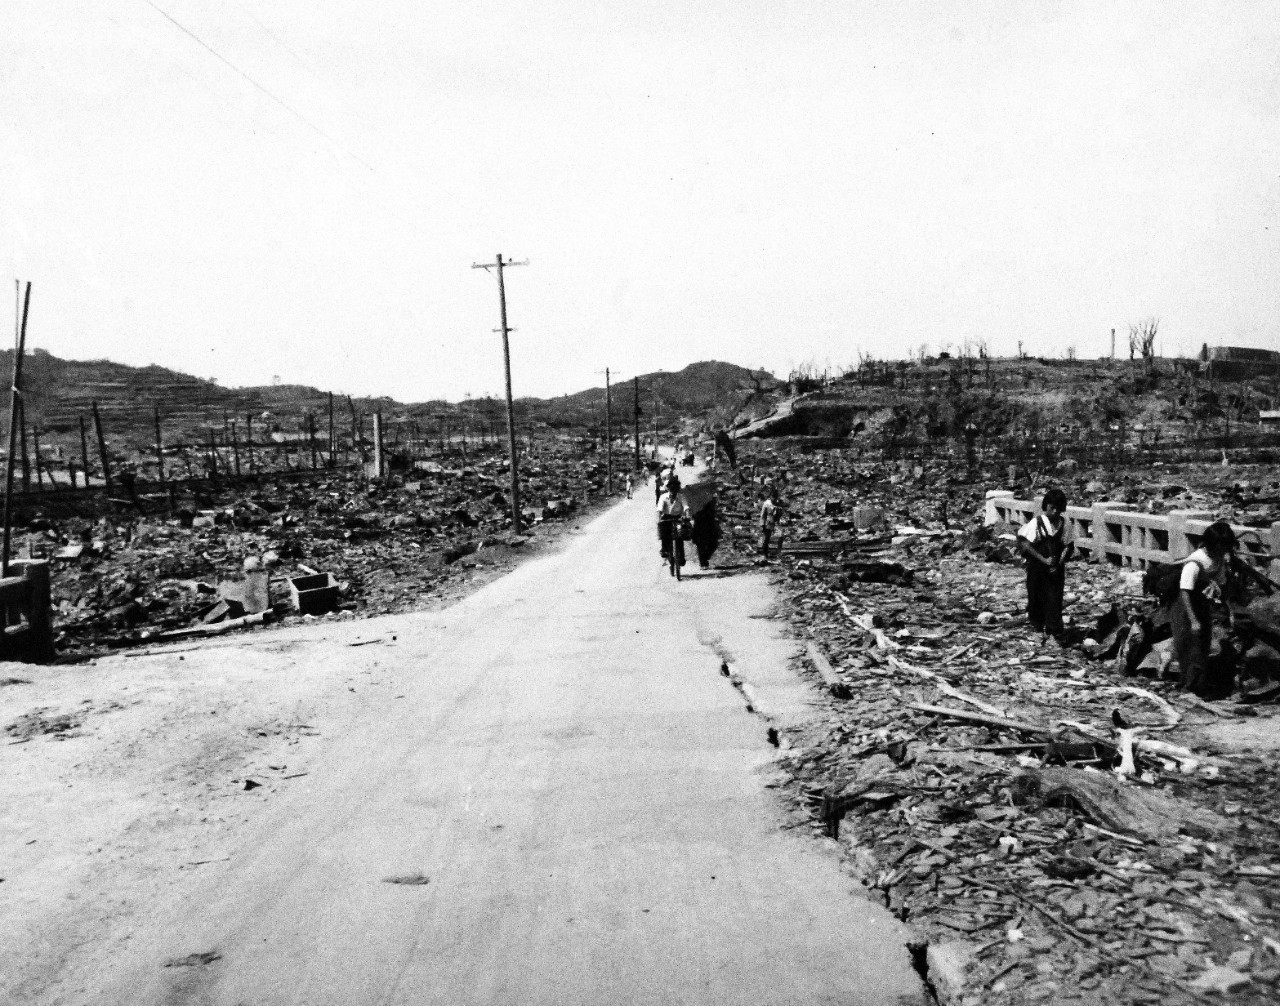 80-G-264910:   Nagasaki, Japan, 1945.   View of the bomb damage from August 9, 1945.  Altitude of 300’.  Photographed by USS Chenango (CVE-28) aircraft on October 15, 1945.  Official U.S. Navy photograph, now in the collections of the National Archives.   (2015/12/01).